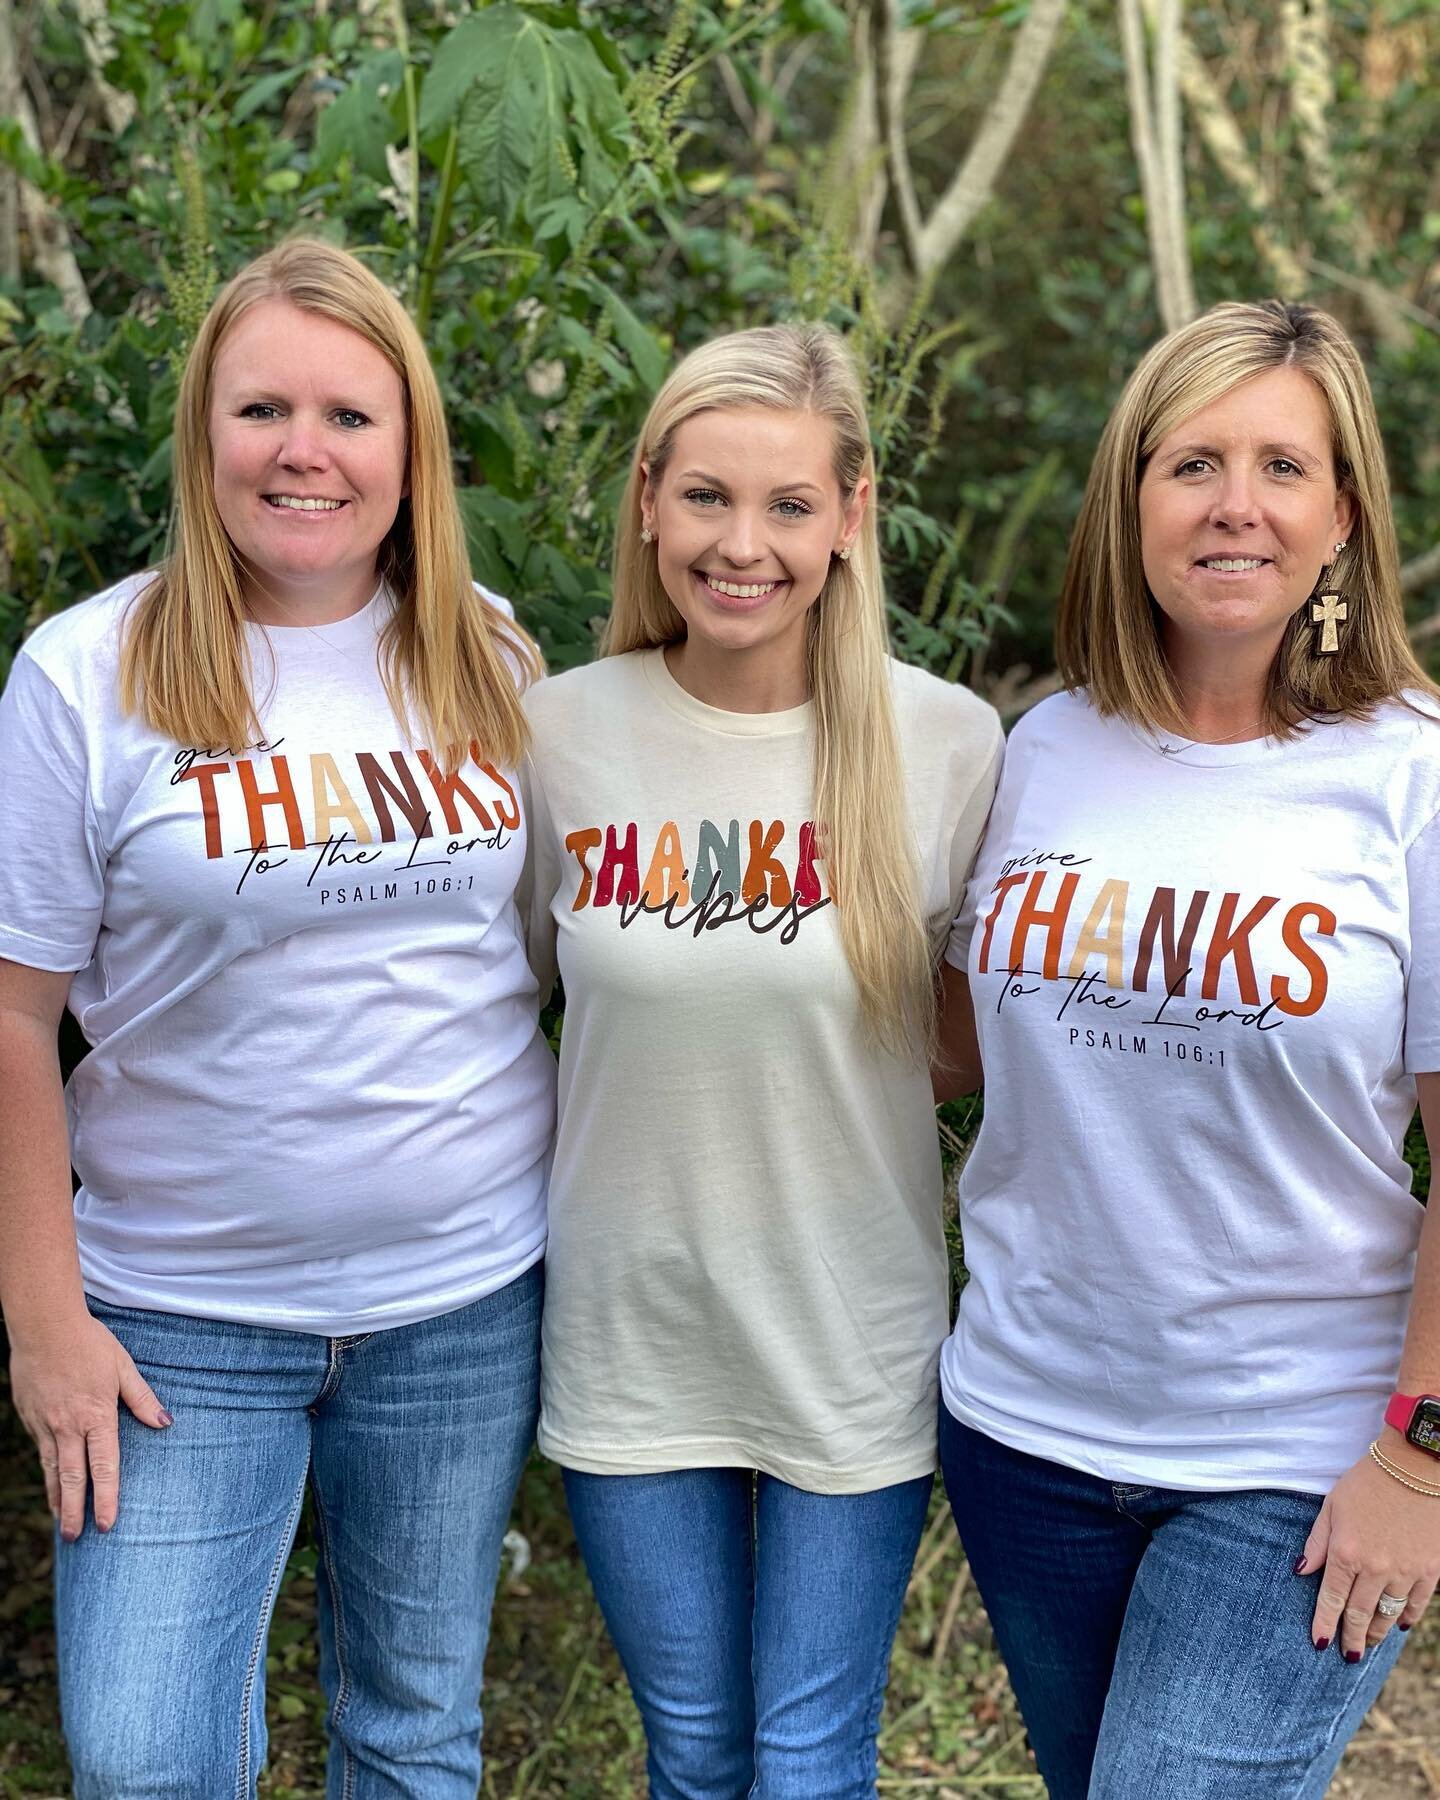 Our Thanksgiving shirts are now available for purchase. Come by and grab one before they're gone!

Give Thanks to the Lord - $10 - Adult Sizes - Short Sleeve
Thankful Vibes - $15 - Adult Sizes - Long Sleeve
Gobble Gobble Gobble - $10 - Youth Sizes - 